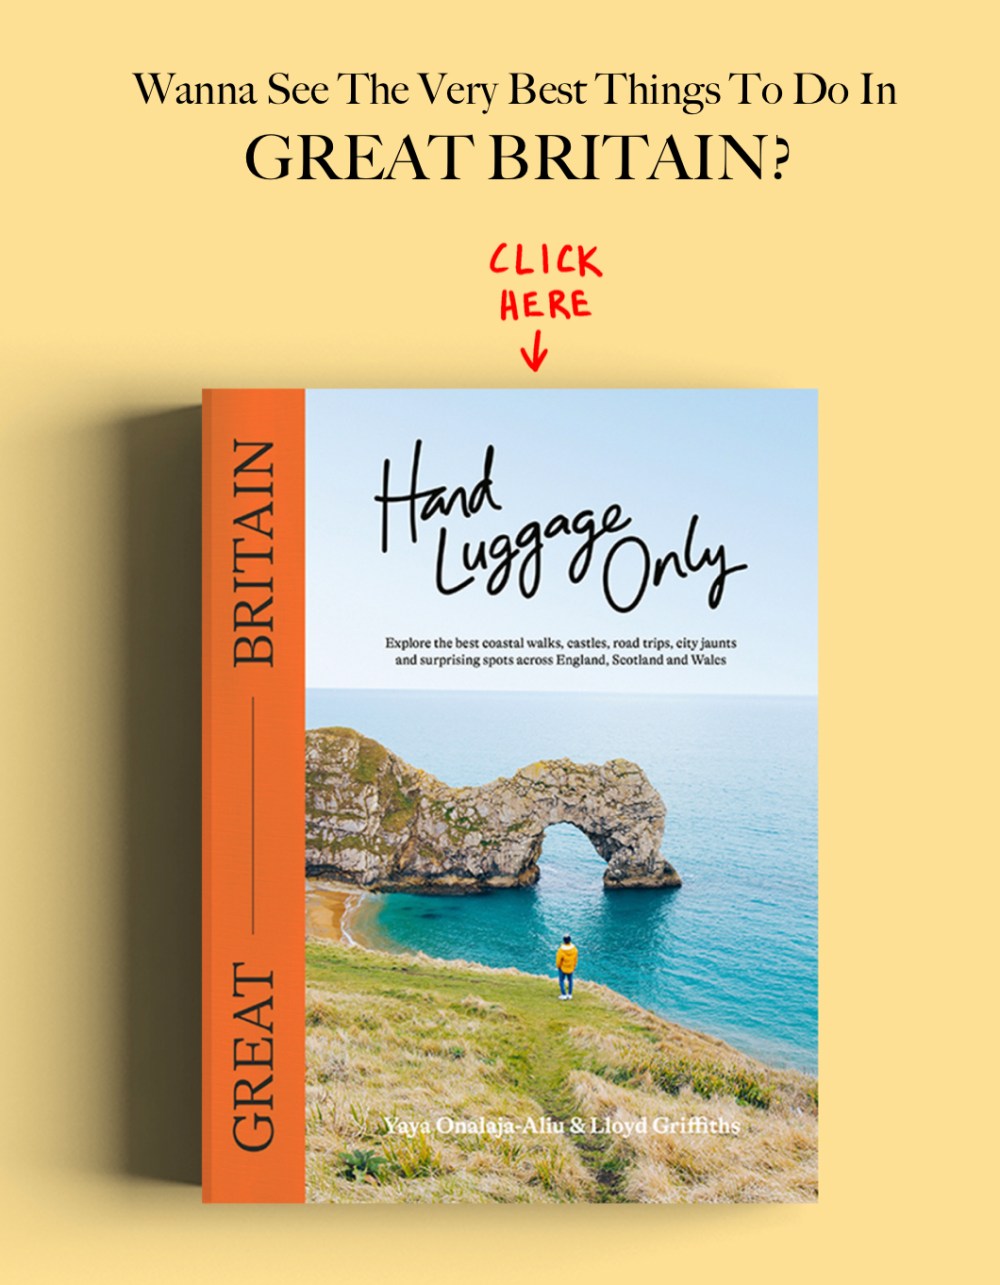 Hand Luggage Only Great Britain Travel Book Advert Banner